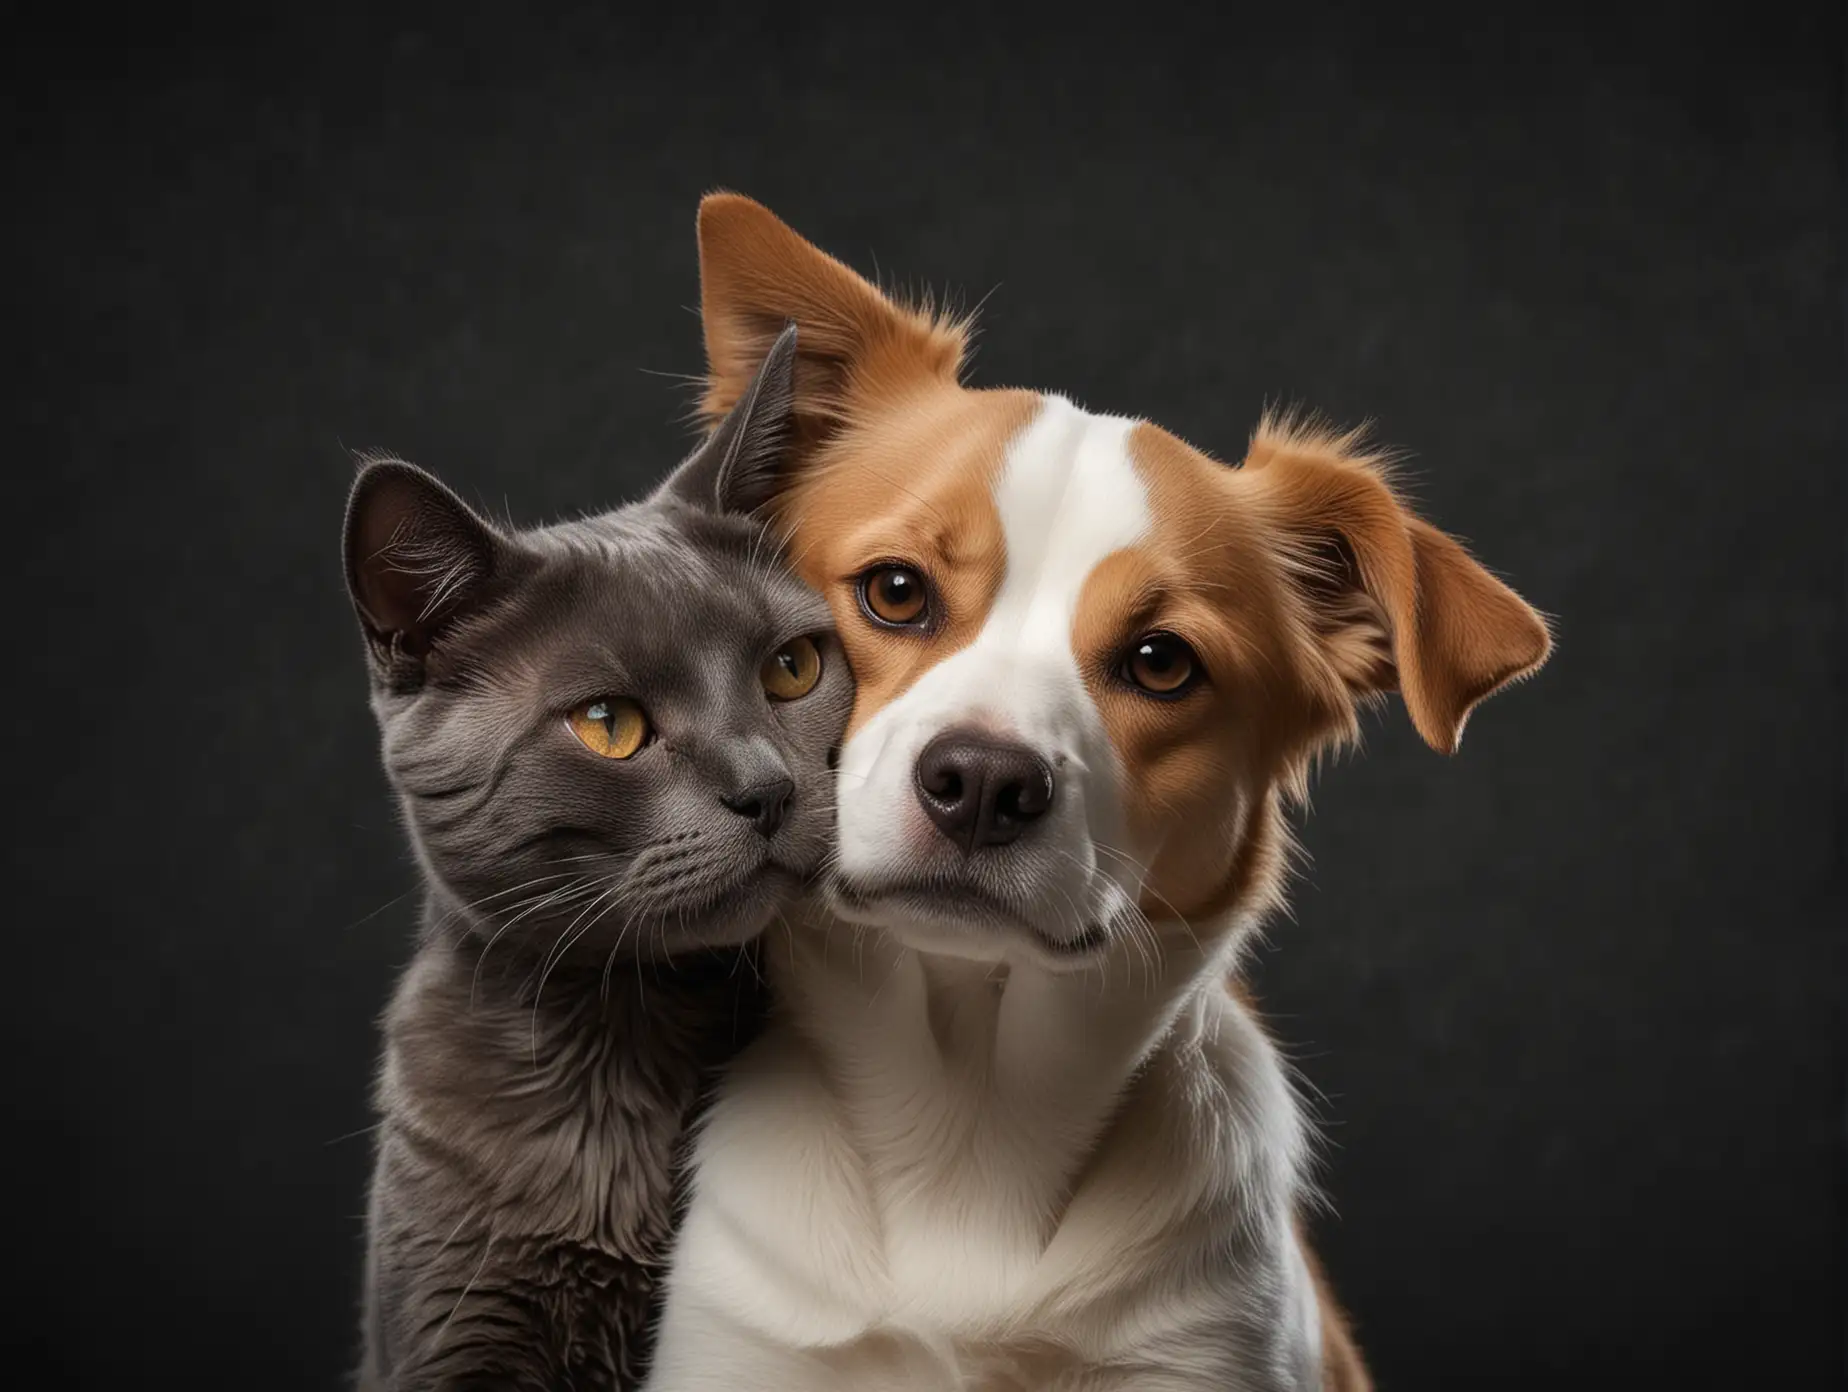 Affectionate Dog and Cat Embrace in Dim Light